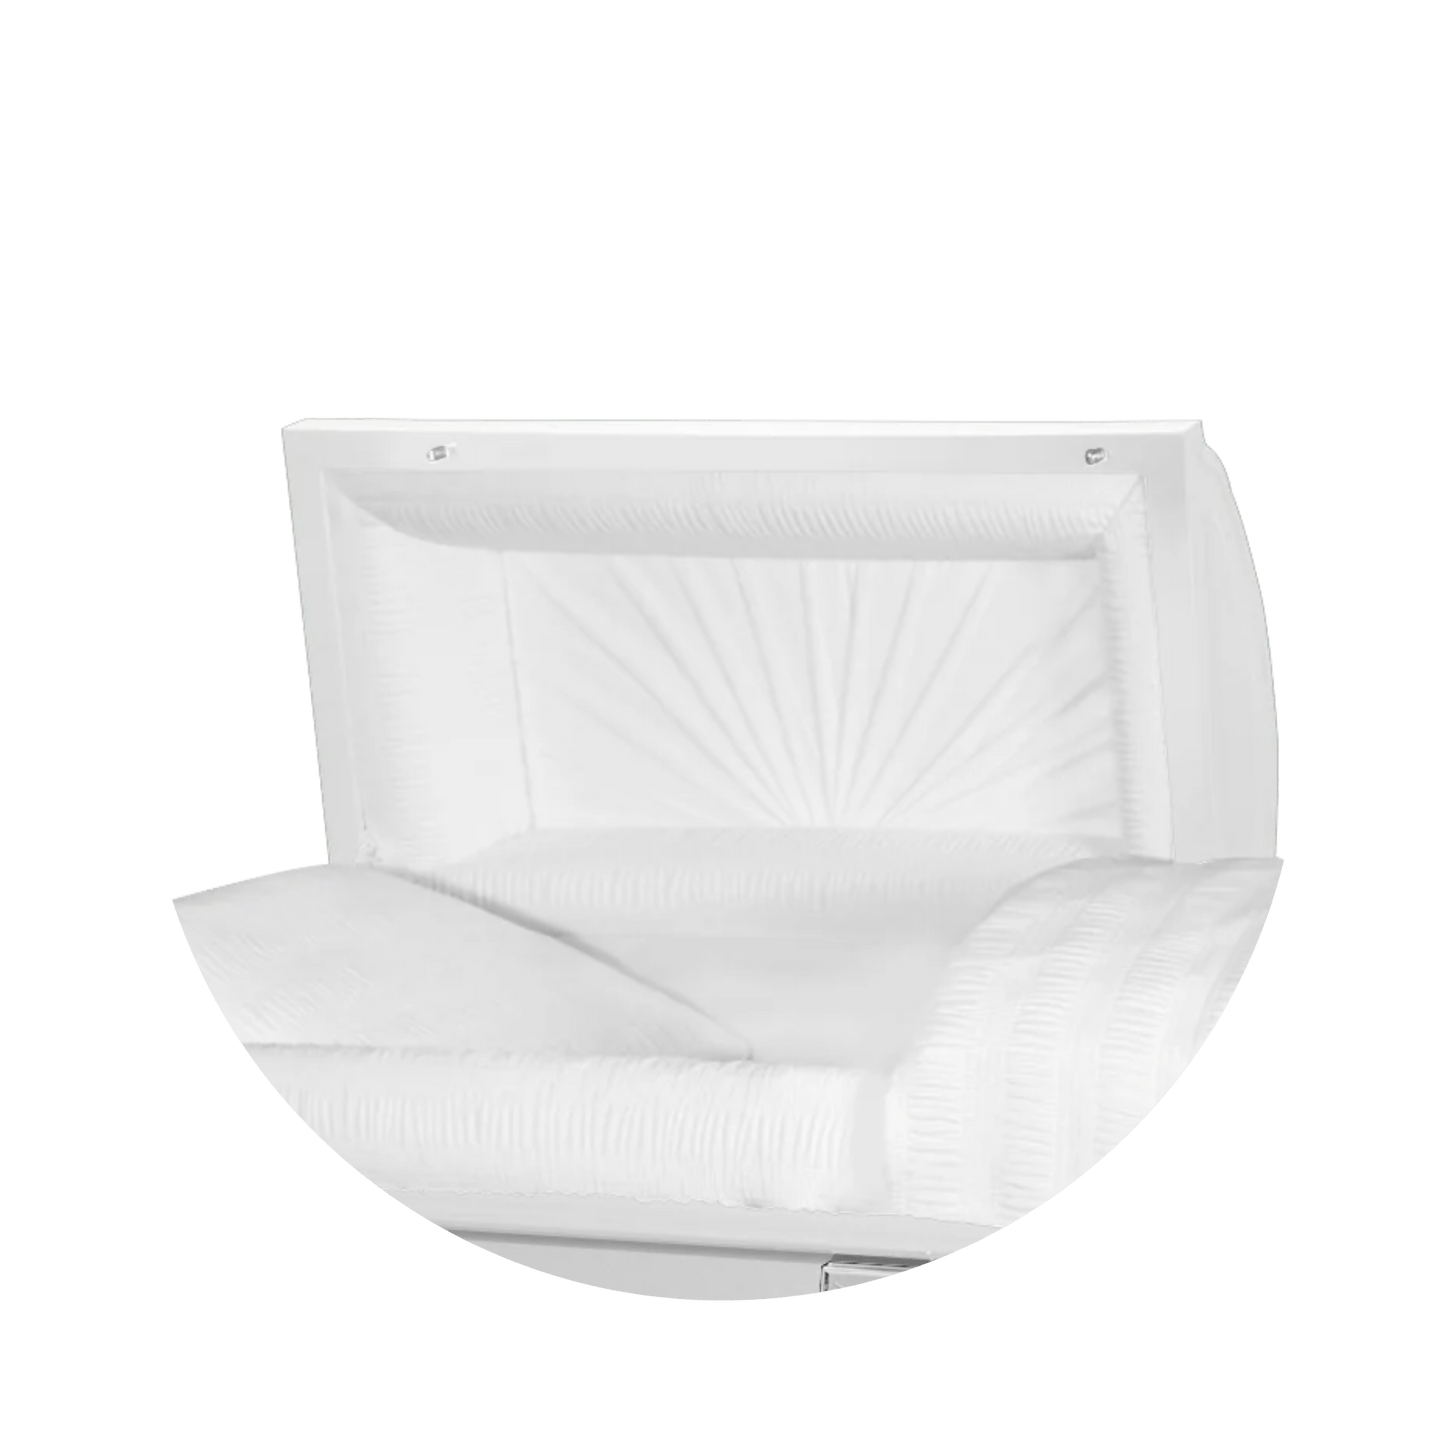 Reflections XL | White Steel Oversize Casket with White Interior